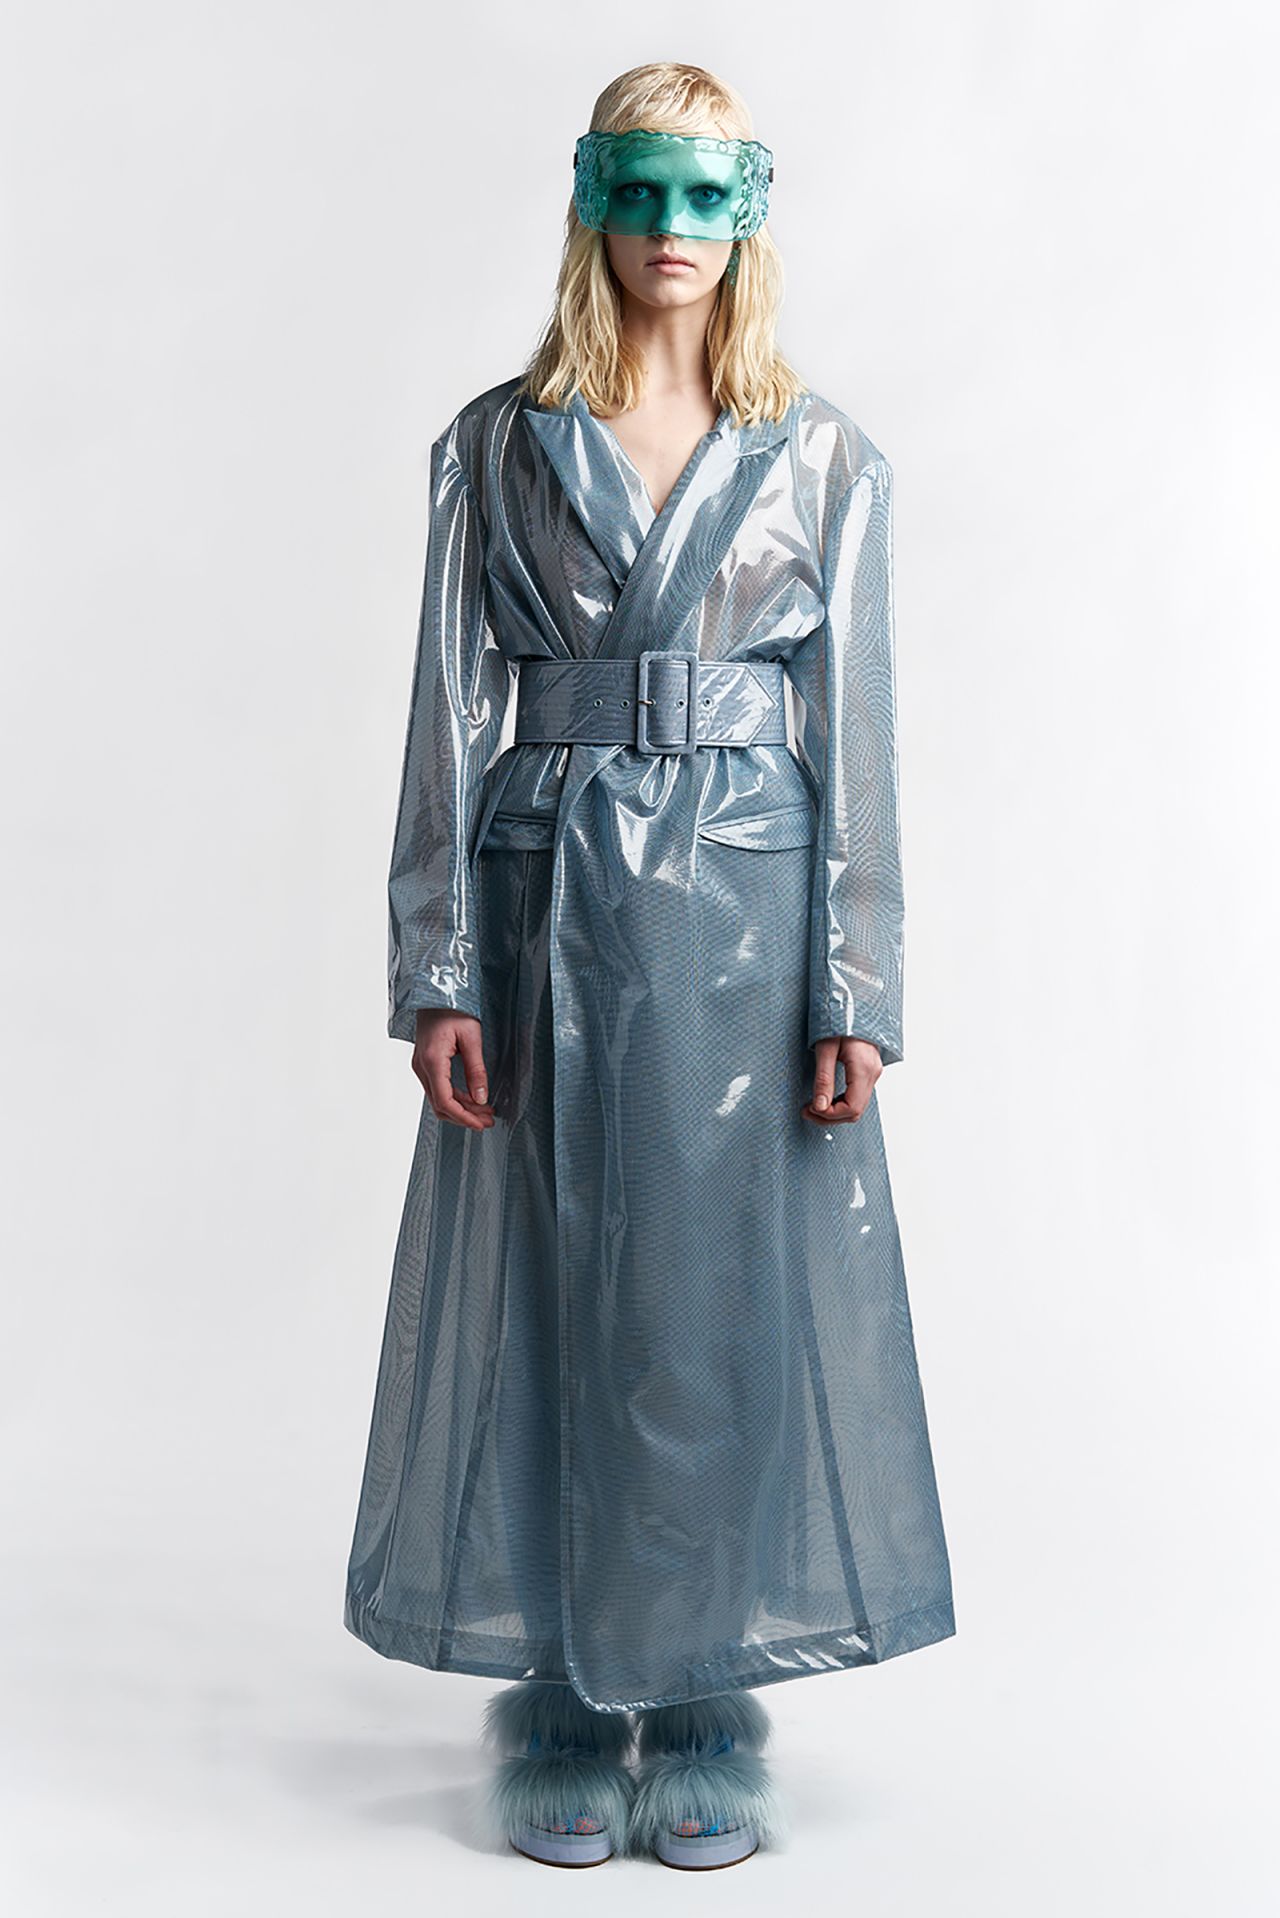 See the full collection <a href="https://www.yahoo.com/lab/nyfw-mw-2022/index.html" target="_blank" target="_blank">here</a> via the Maisie Wilen Holographic Experience.